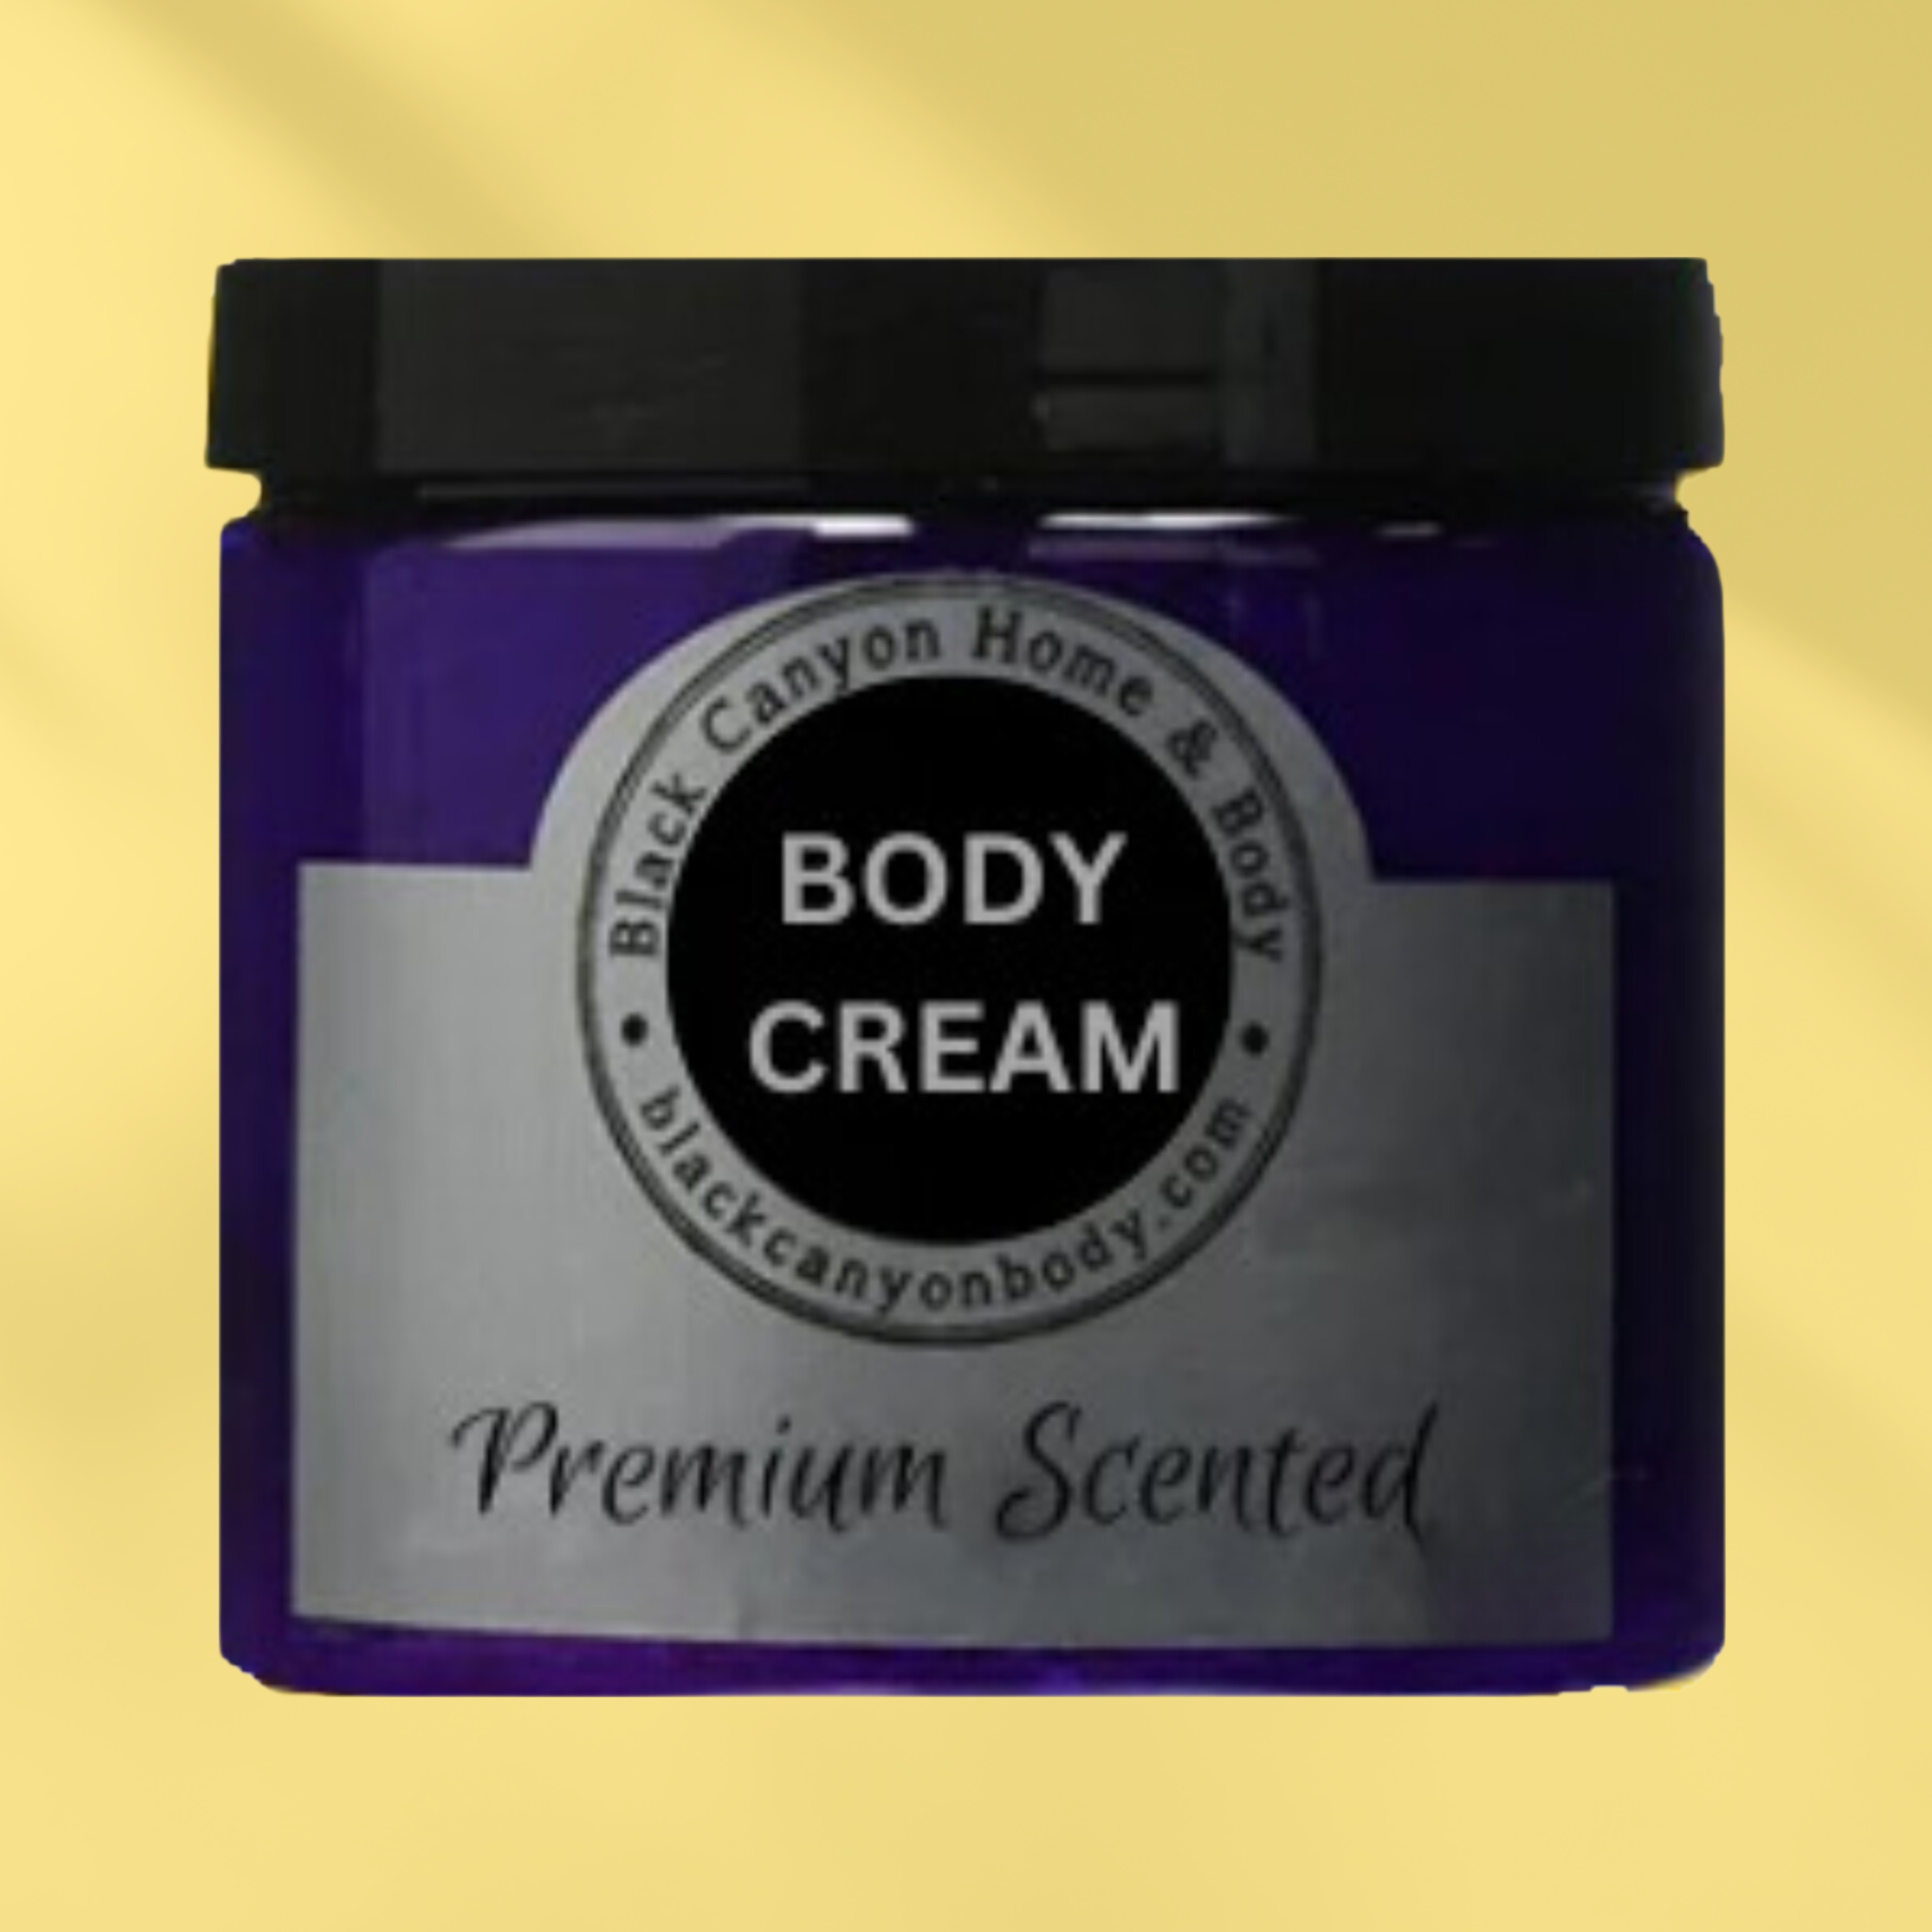 Black Canyon Currant & Amber Scented Luxury Body Cream with Aloe